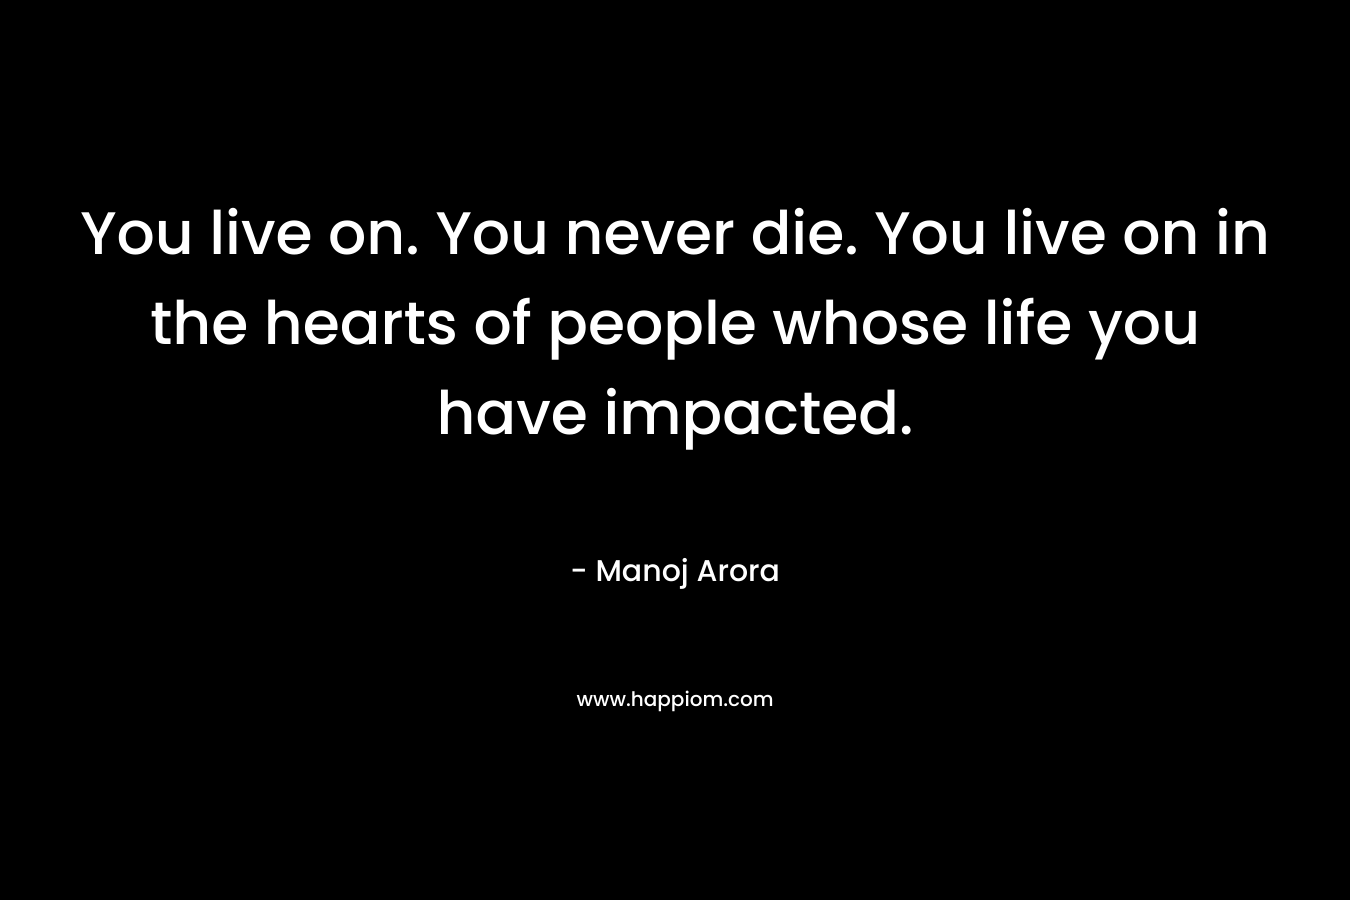 You live on. You never die. You live on in the hearts of people whose life you have impacted. – Manoj Arora